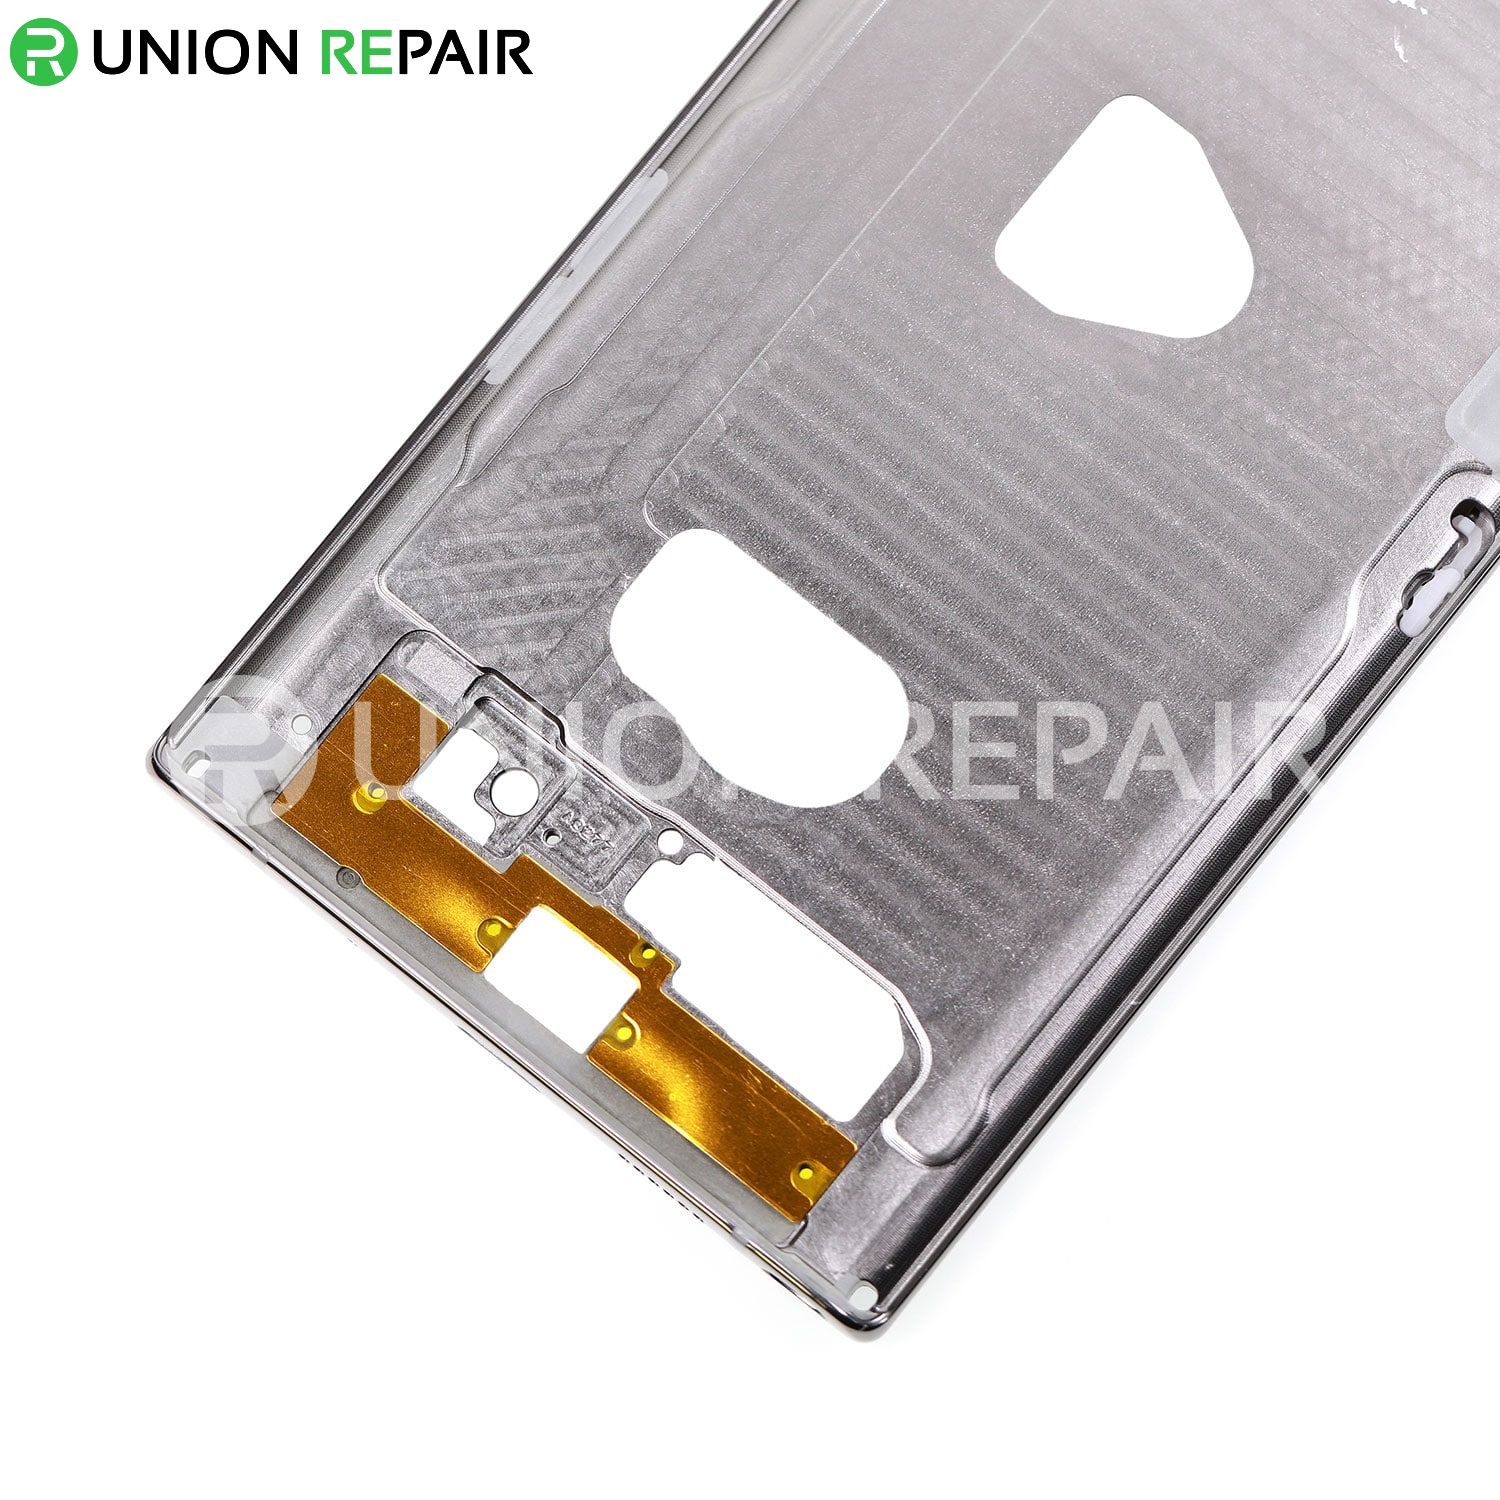 Replacement for Samsung Galaxy Note 10 Plus Rear Housing Frame - Silver